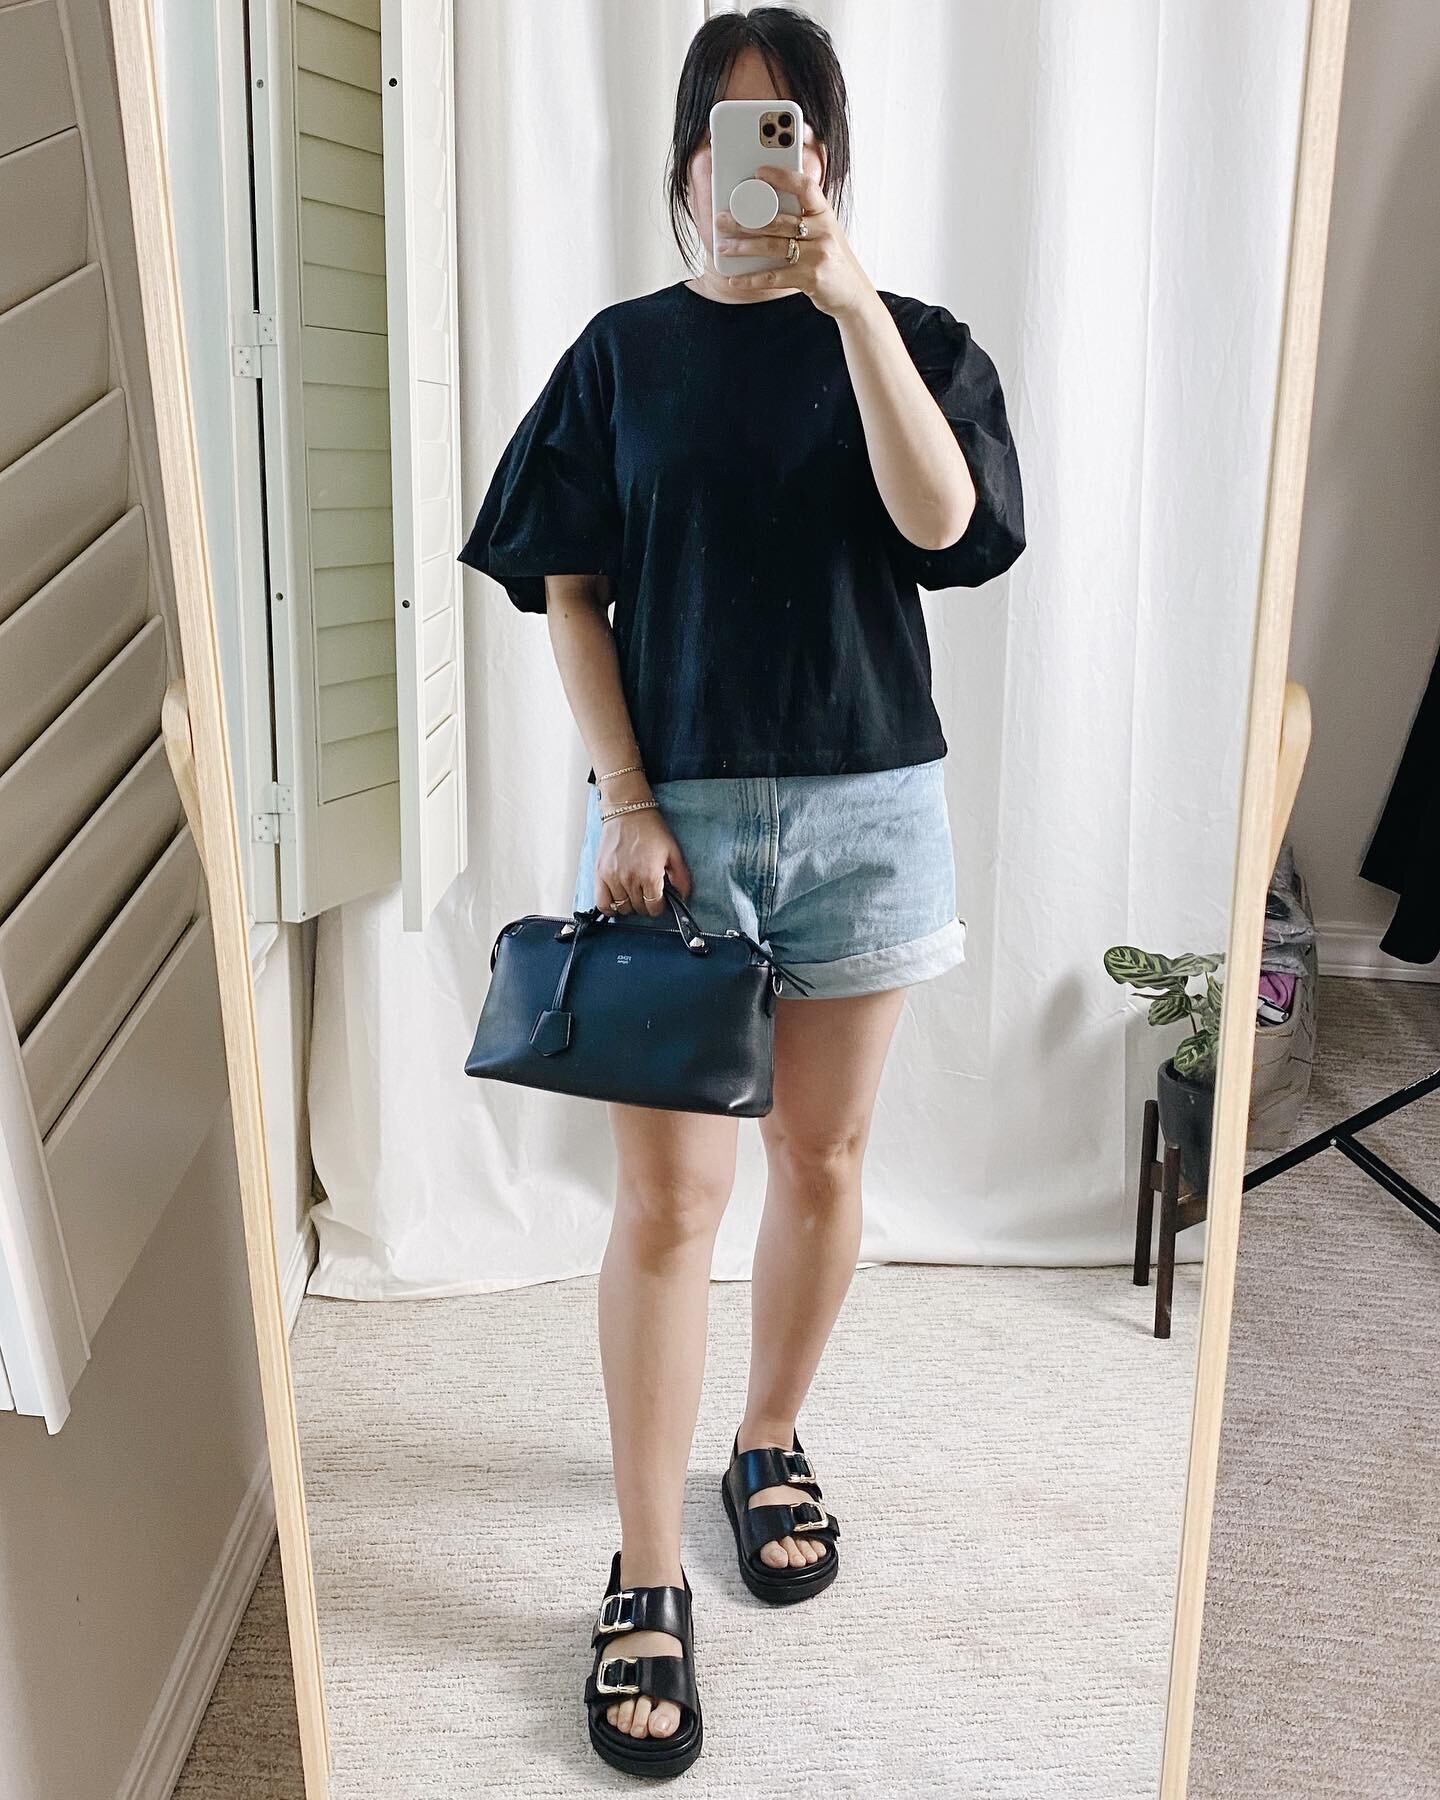 Tuesday #ootd and the first 13 days of my no-buy month challenge completed ✔️ 
&mdash;&mdash;&mdash;
Outfit details
Top: @kowtowclothing from @therealreal 
Shorts: @everlane A-line shorts
Shoes: @alohas (gifted)
Bag: @fendi by the way bag
.
.
.

 #se